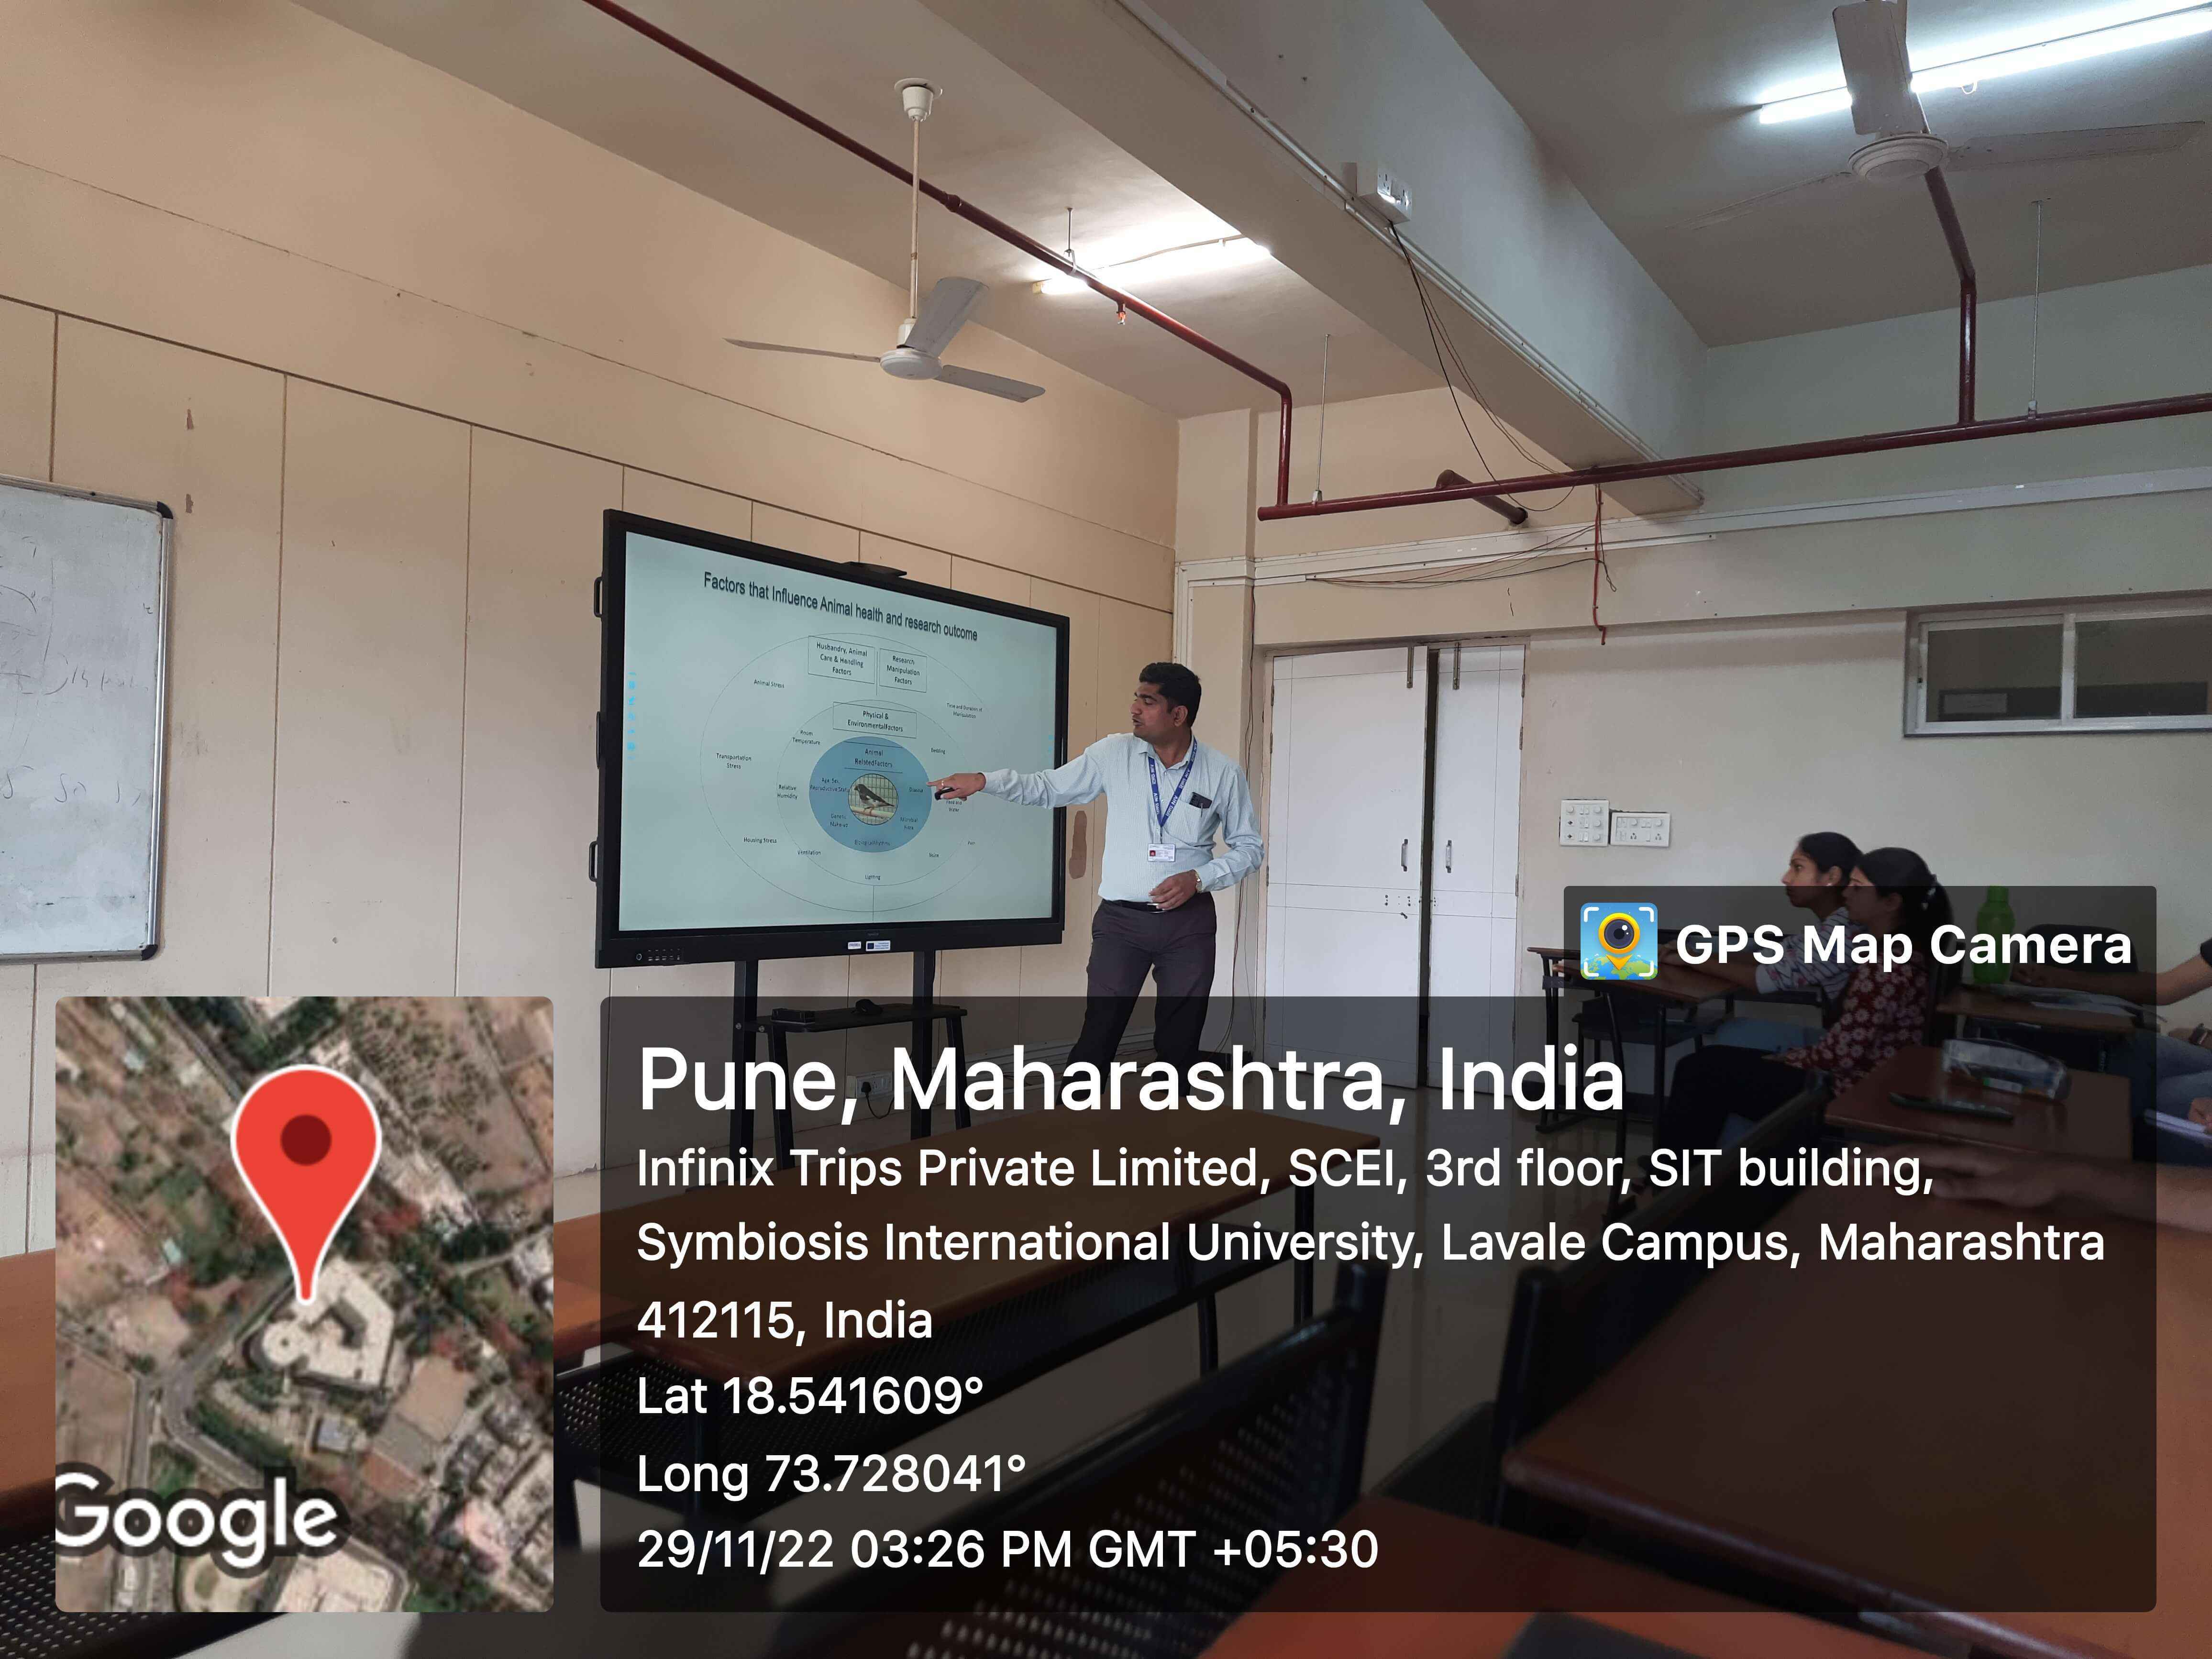  Dr. Dilip Patil, Scientist E, Department of Animal House Group National Institute of Virology, Pune. 29th November 2022. Lecture Title: Health monitoring in laboratory animals and microbial testing of rodents in the breeding facility.